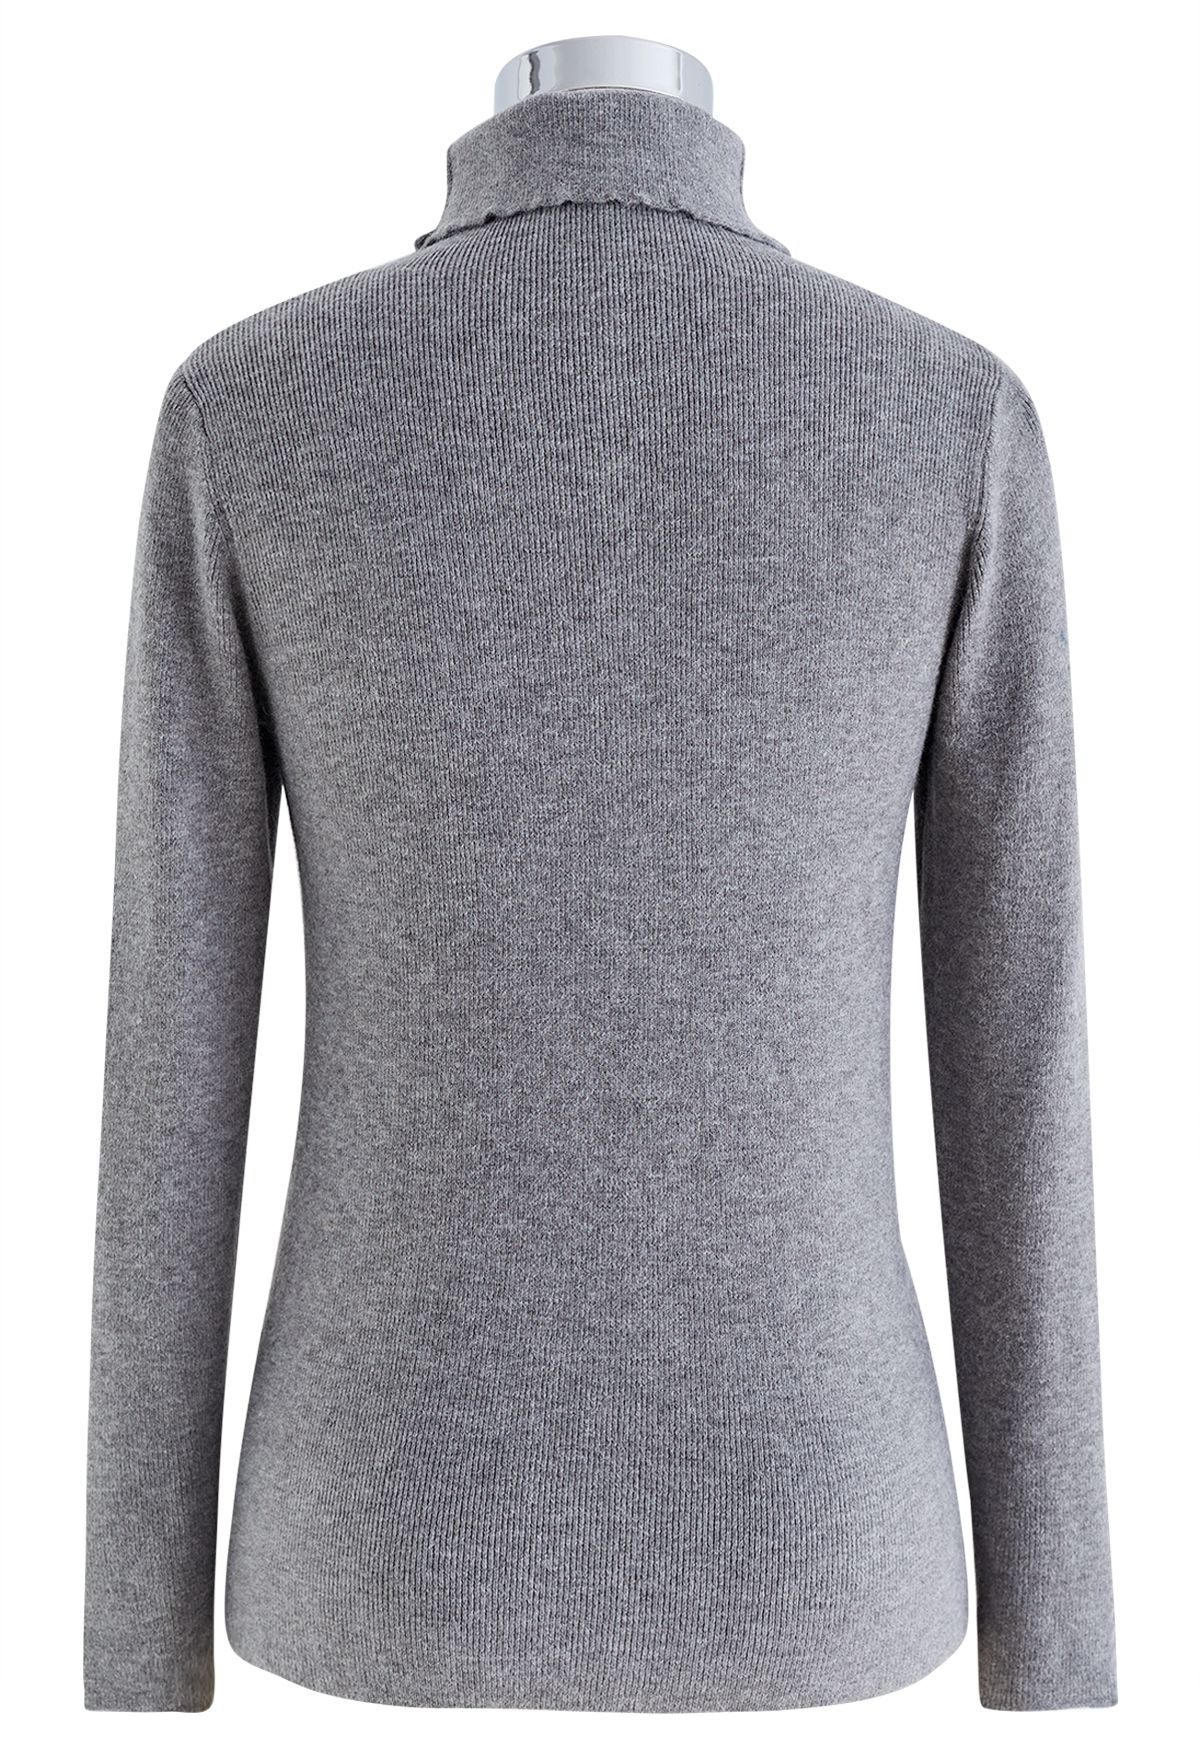 Seam Detail High Neck Slit Knit Top in Grey - Retro, Indie and Unique ...